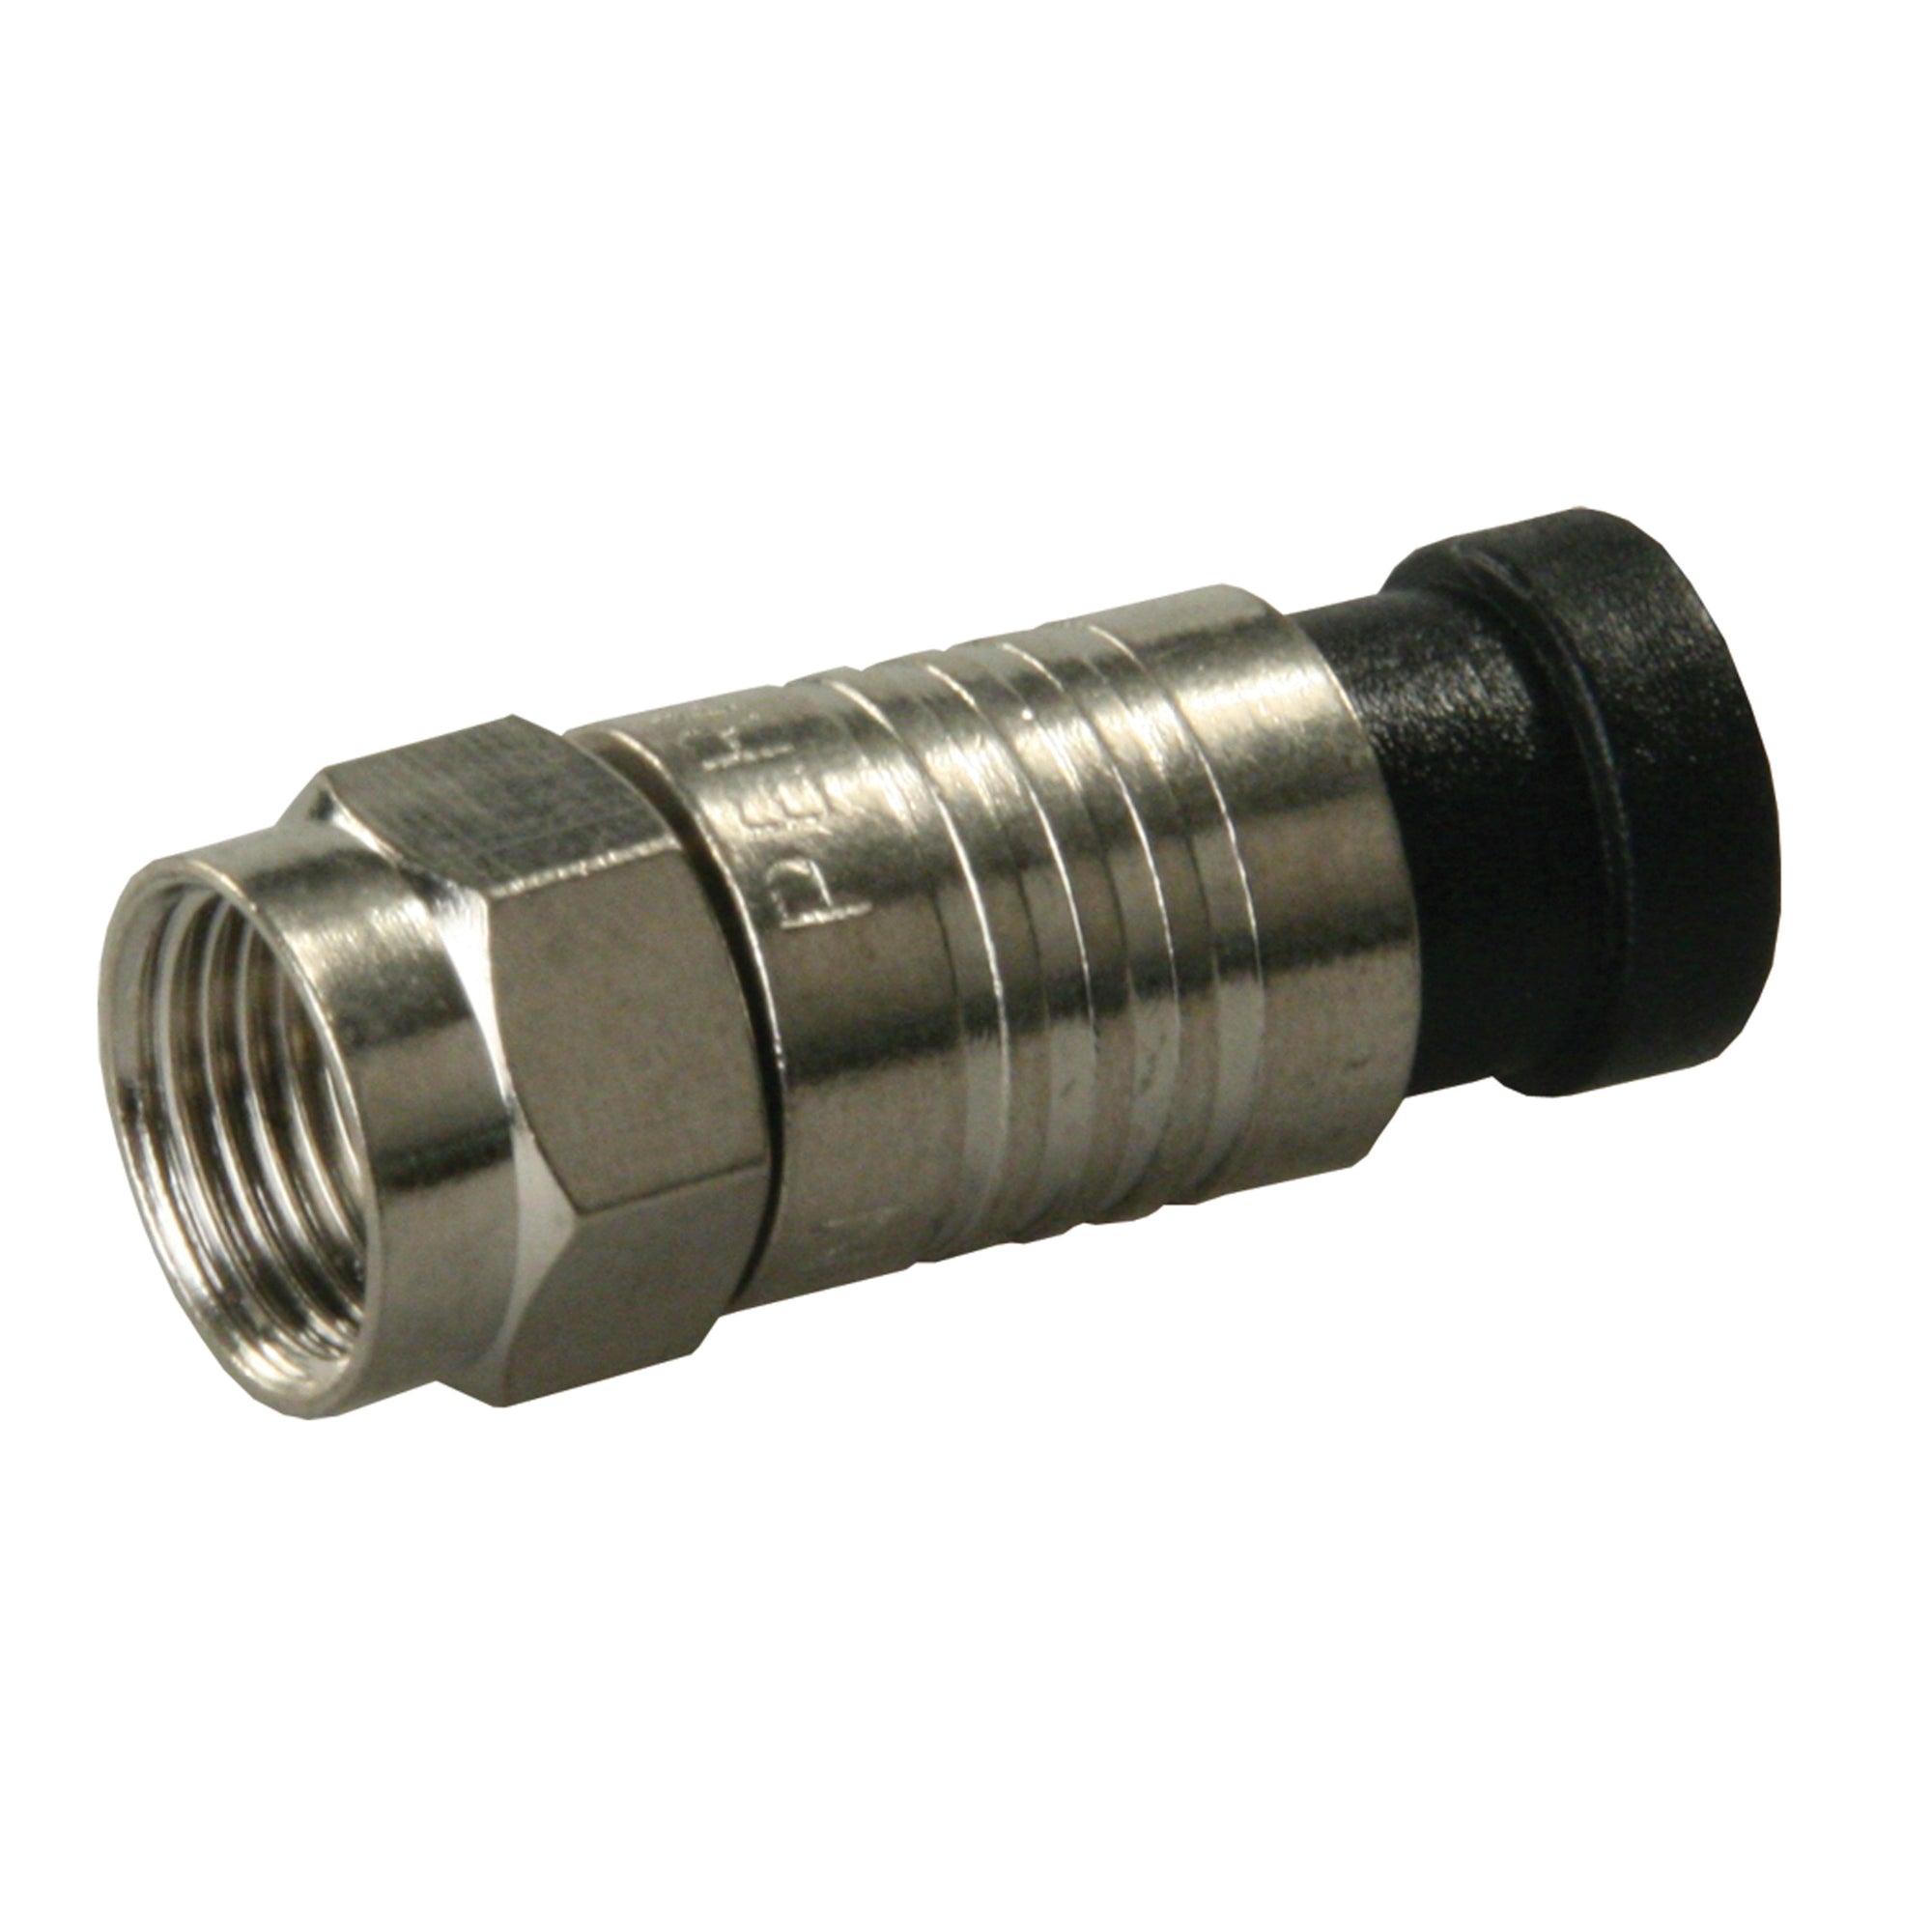 JR Products 47295 RG6 HD/Satellite Compression Fitting